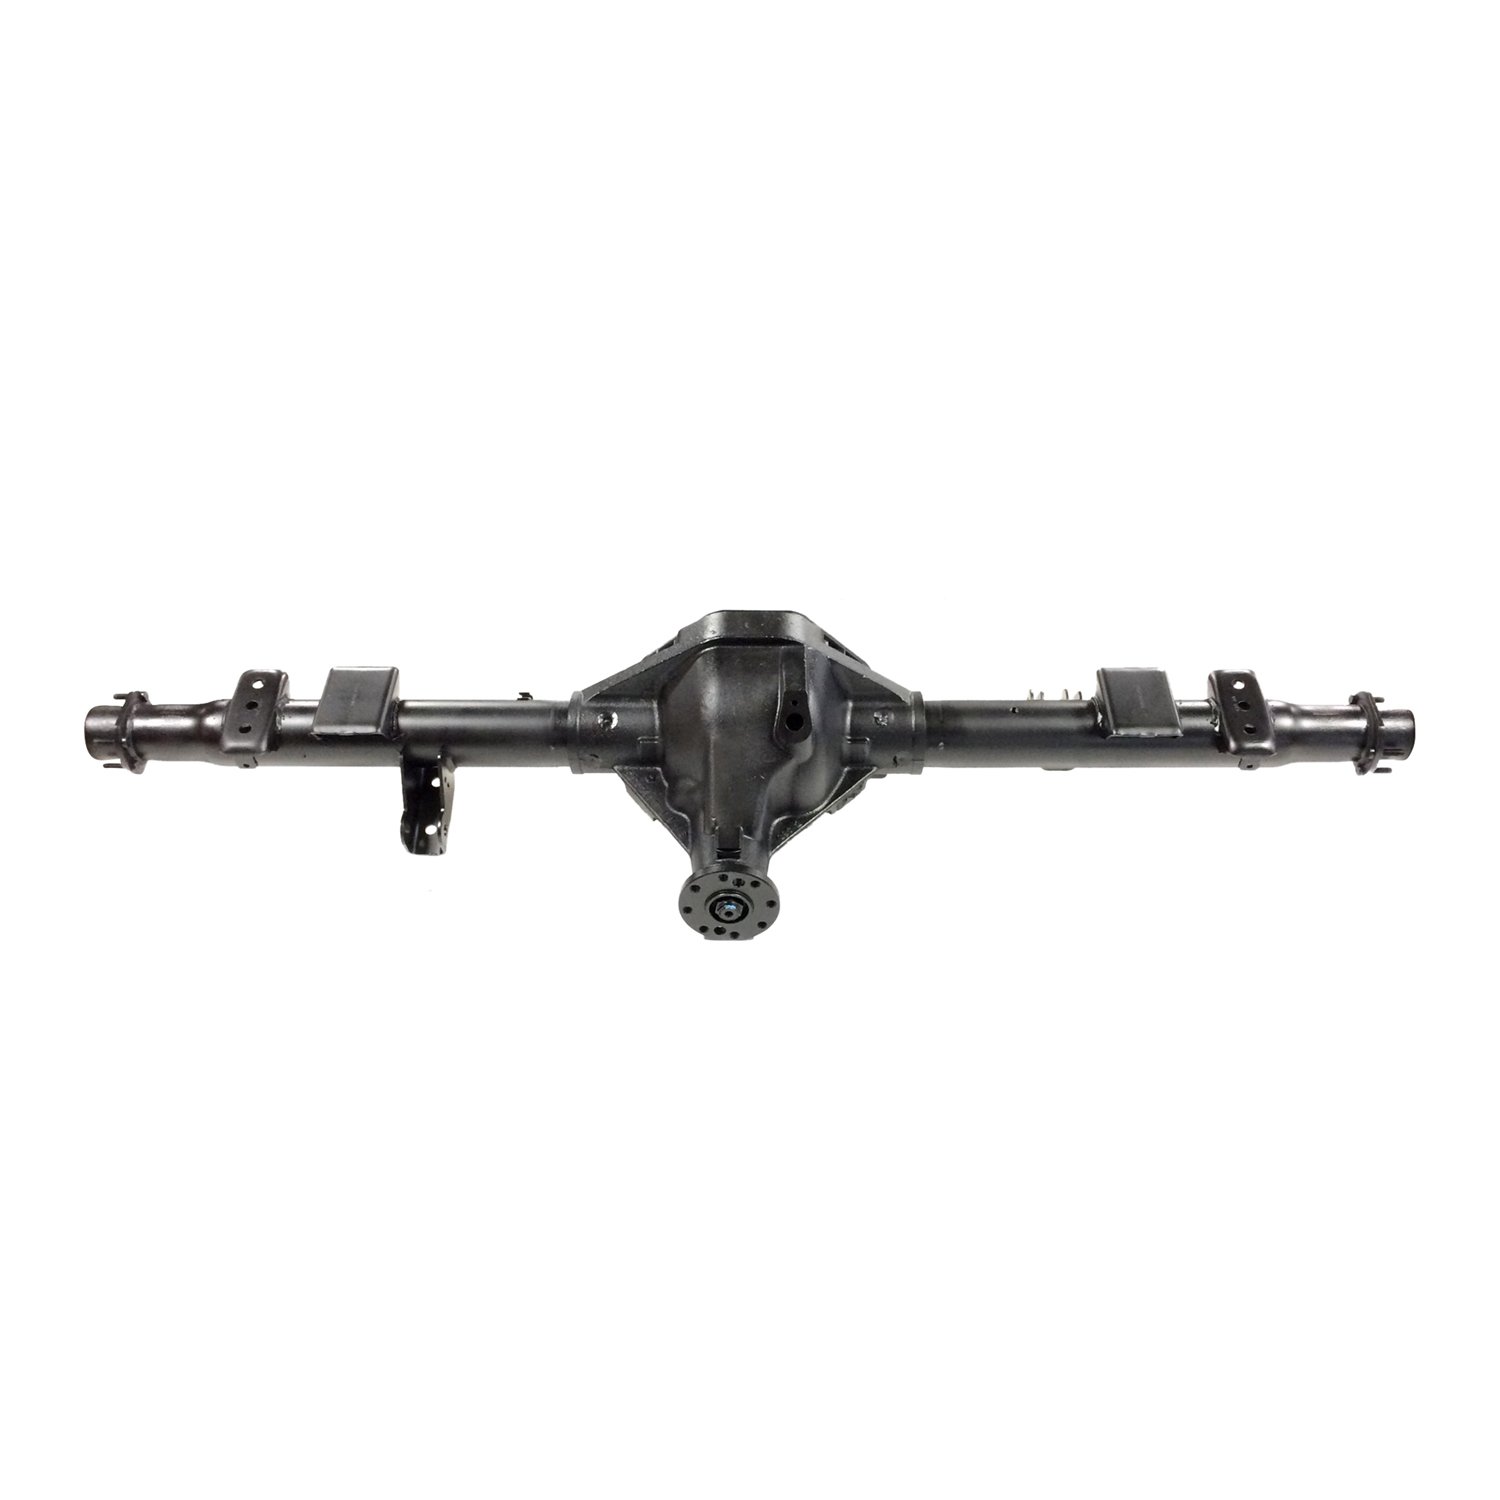 Remanufactured Complete Axle Assembly for Chy 9.25" 06-07 D1500 3.90 , 4x4, Posi LSD